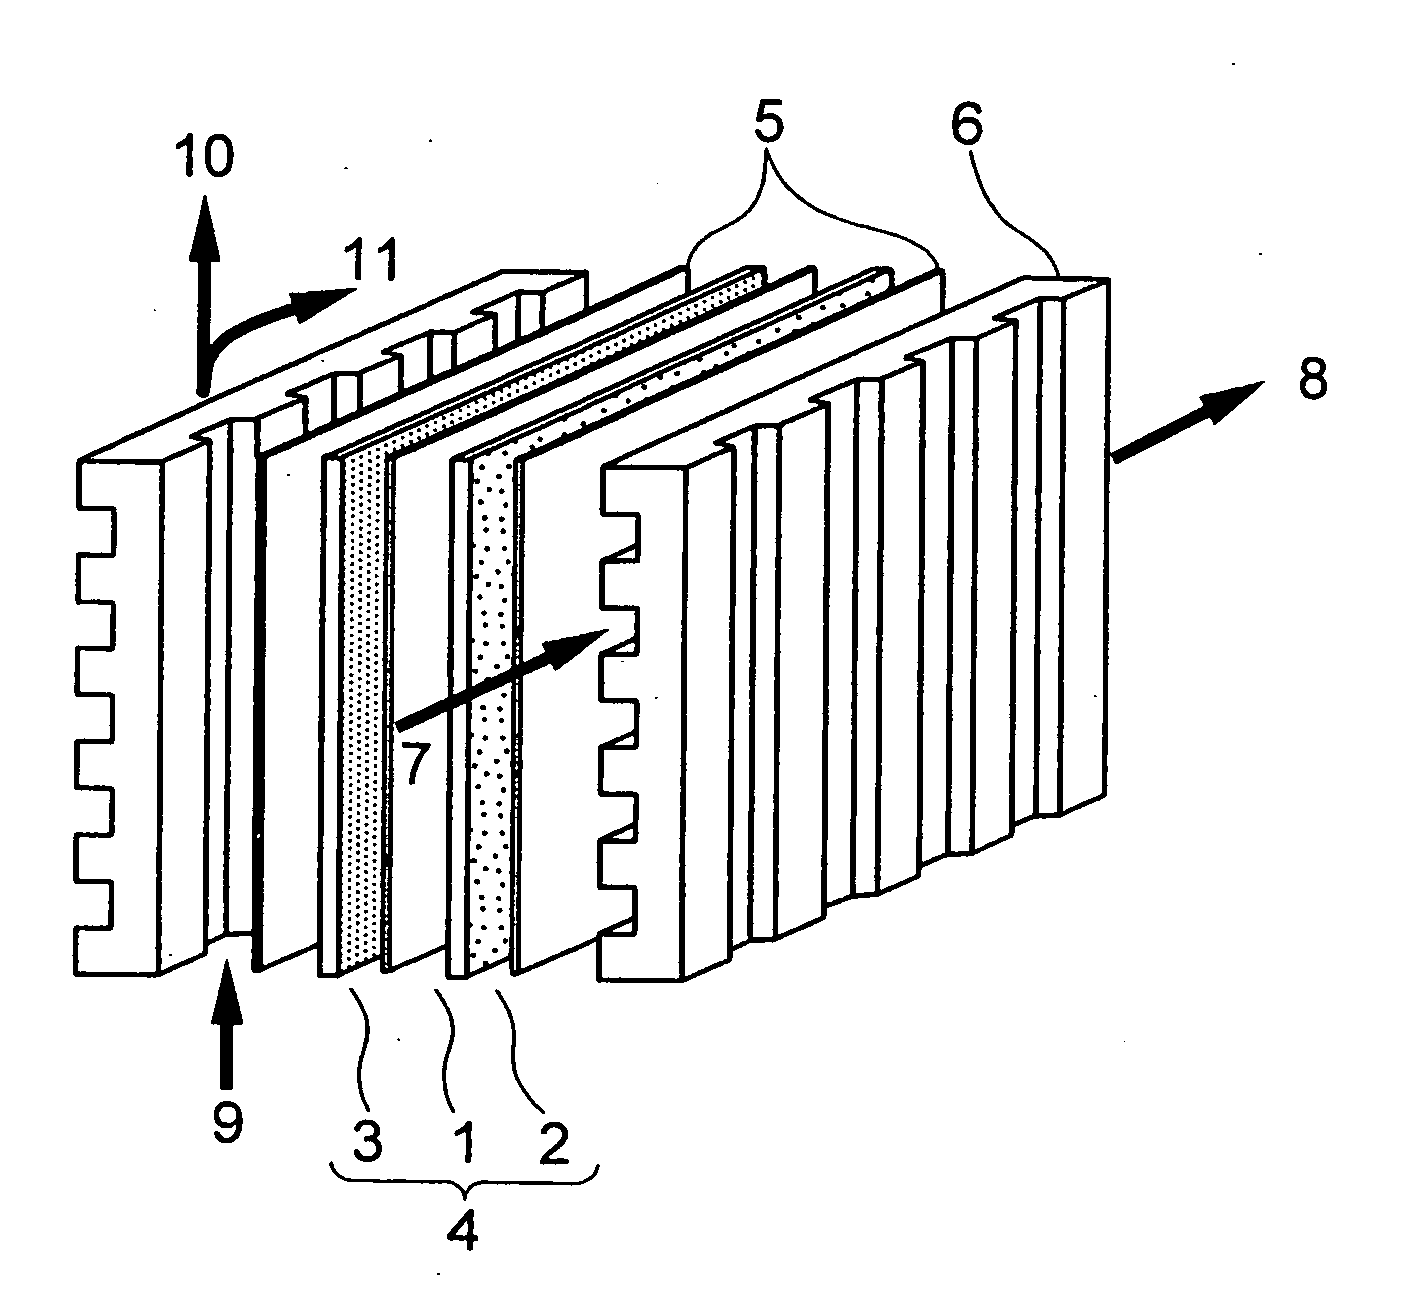 Solid polyelectrolyte, assembly of membrane and electrodes, amd fuel cell